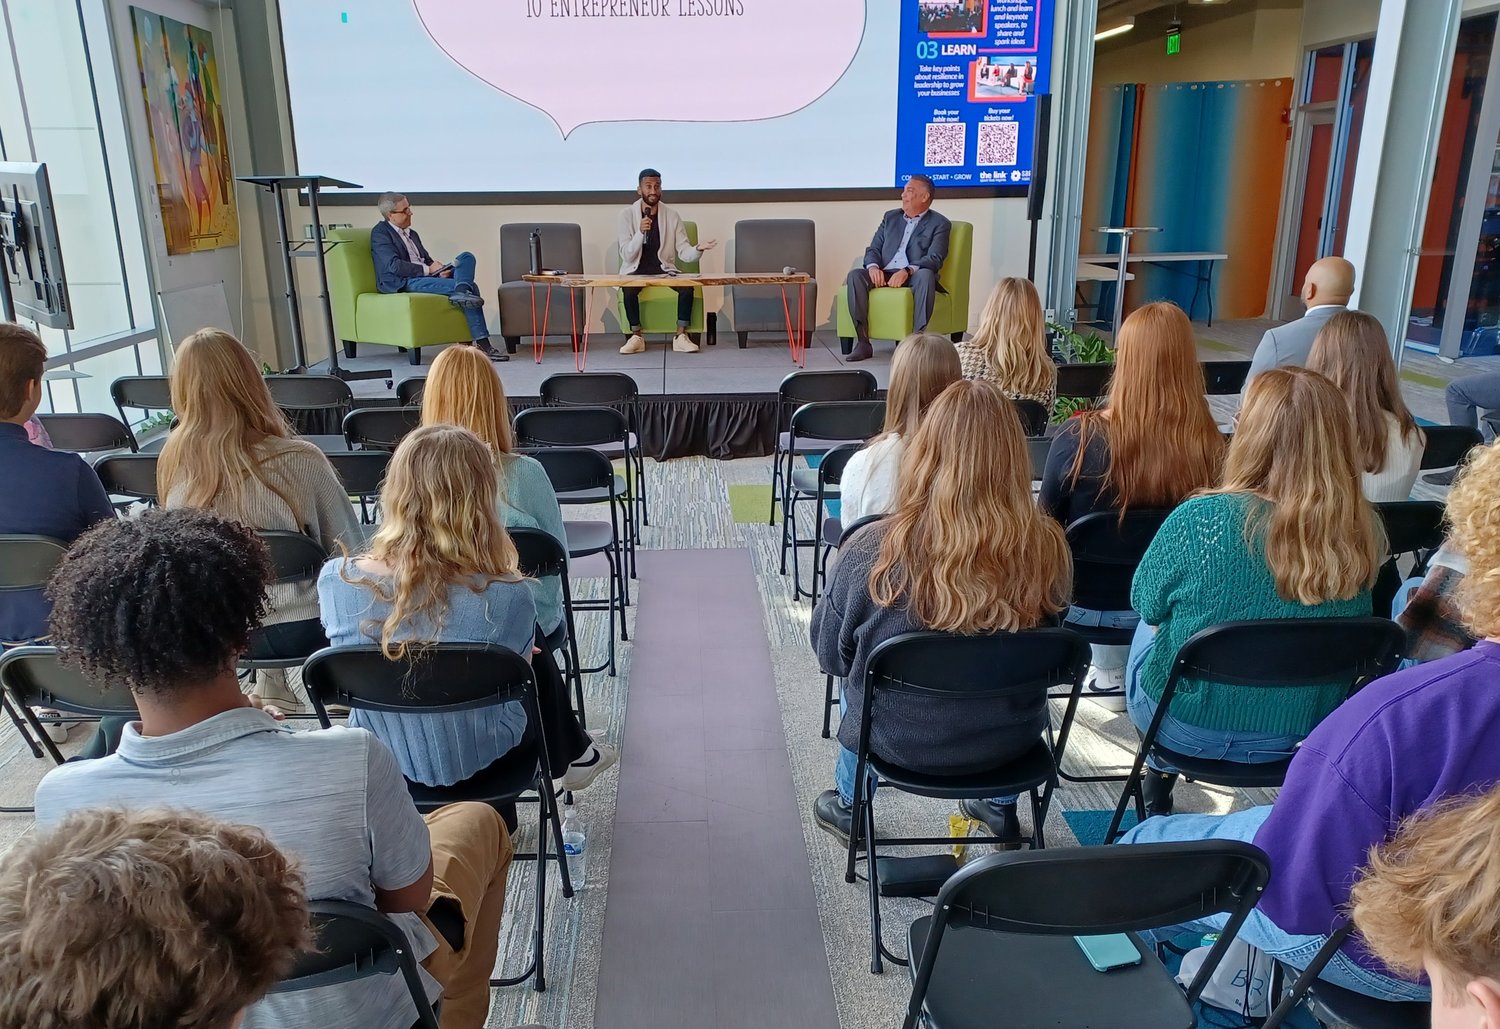 Entrepreneur Danish Sayed speaks to students from Ponte Vedra High School during the three-day celebration of entrepreneurship, EnterCircle Summit 2022, which was held at the link in Nocatee.